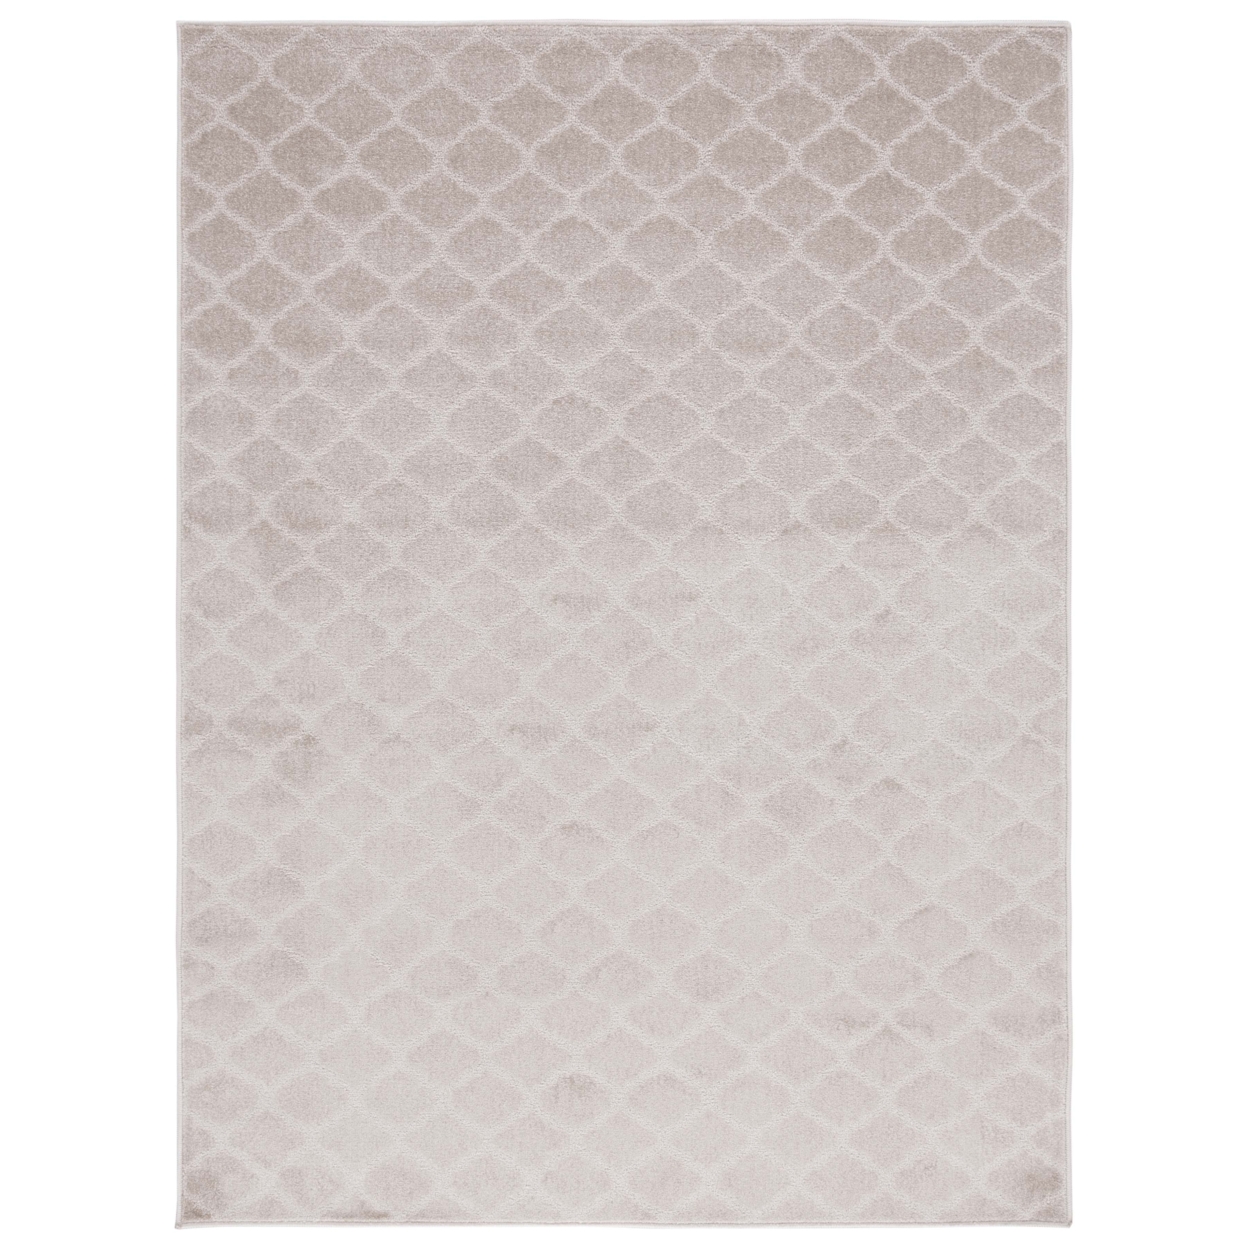 Safavieh PNS404B Pattern And Solid Beige - Taupe / Ivory, 5'-3 X 7'-6 Rectangle